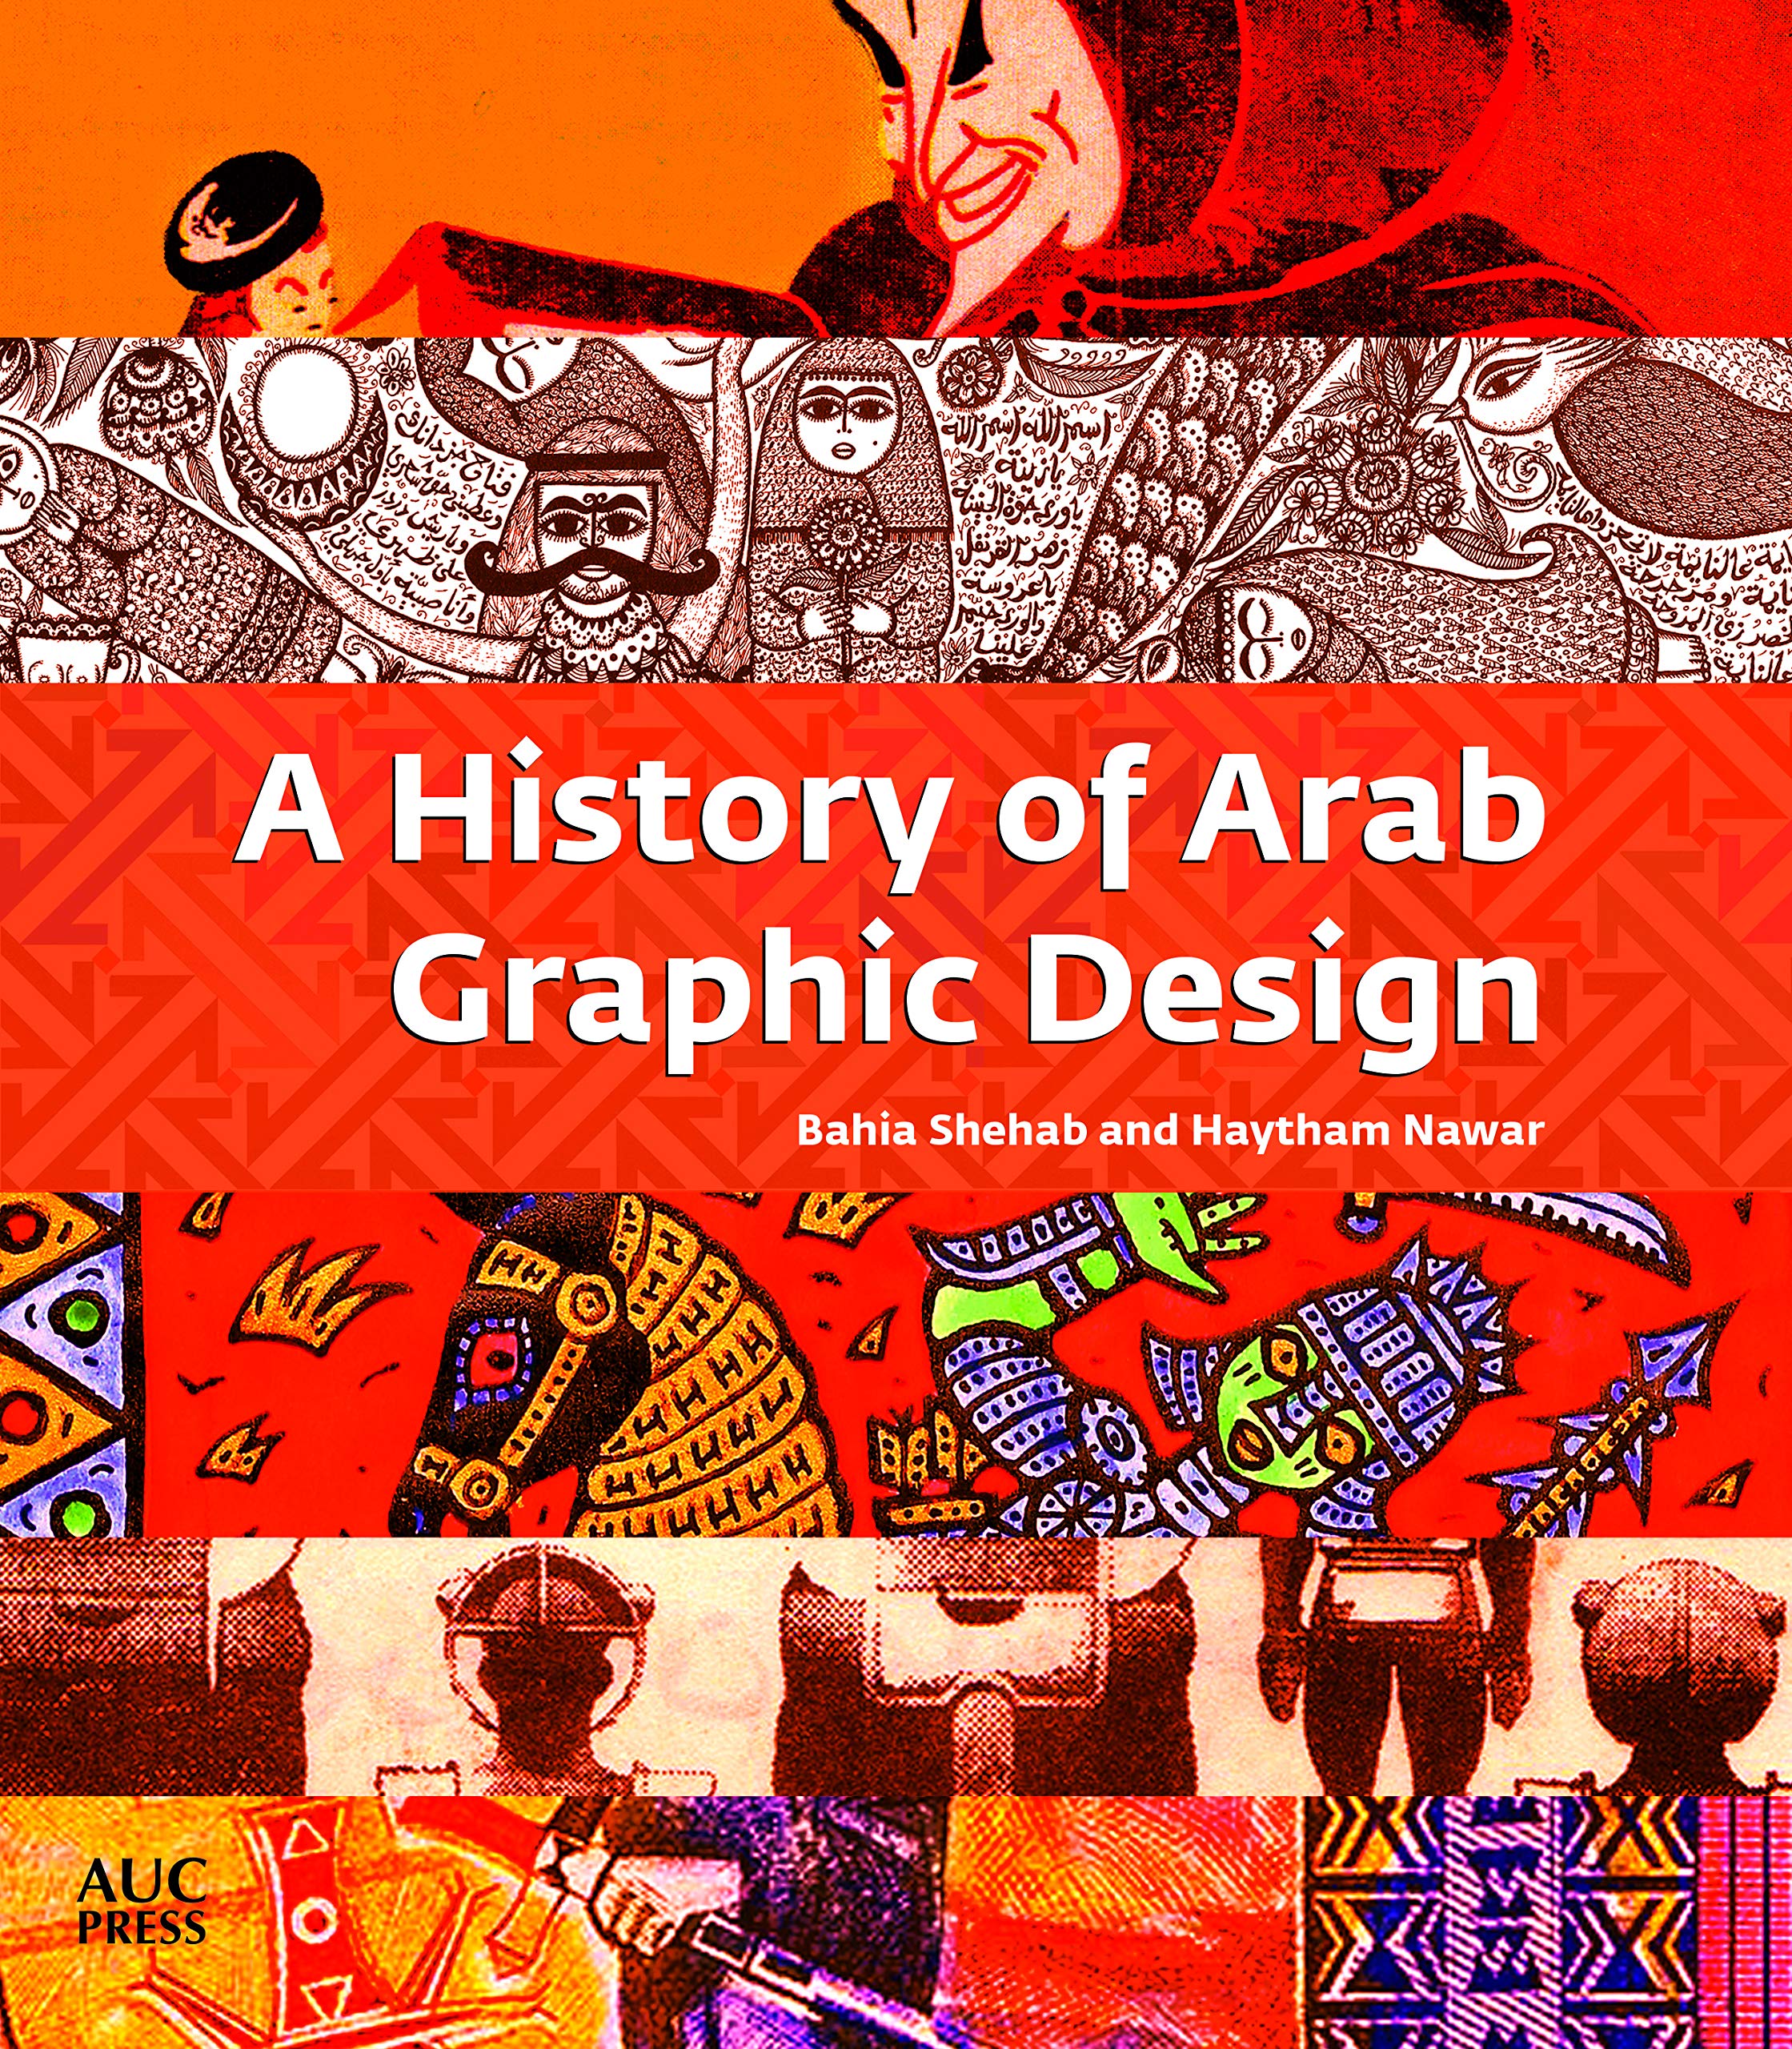 Image of the cover of A History of Arab Graphic Design